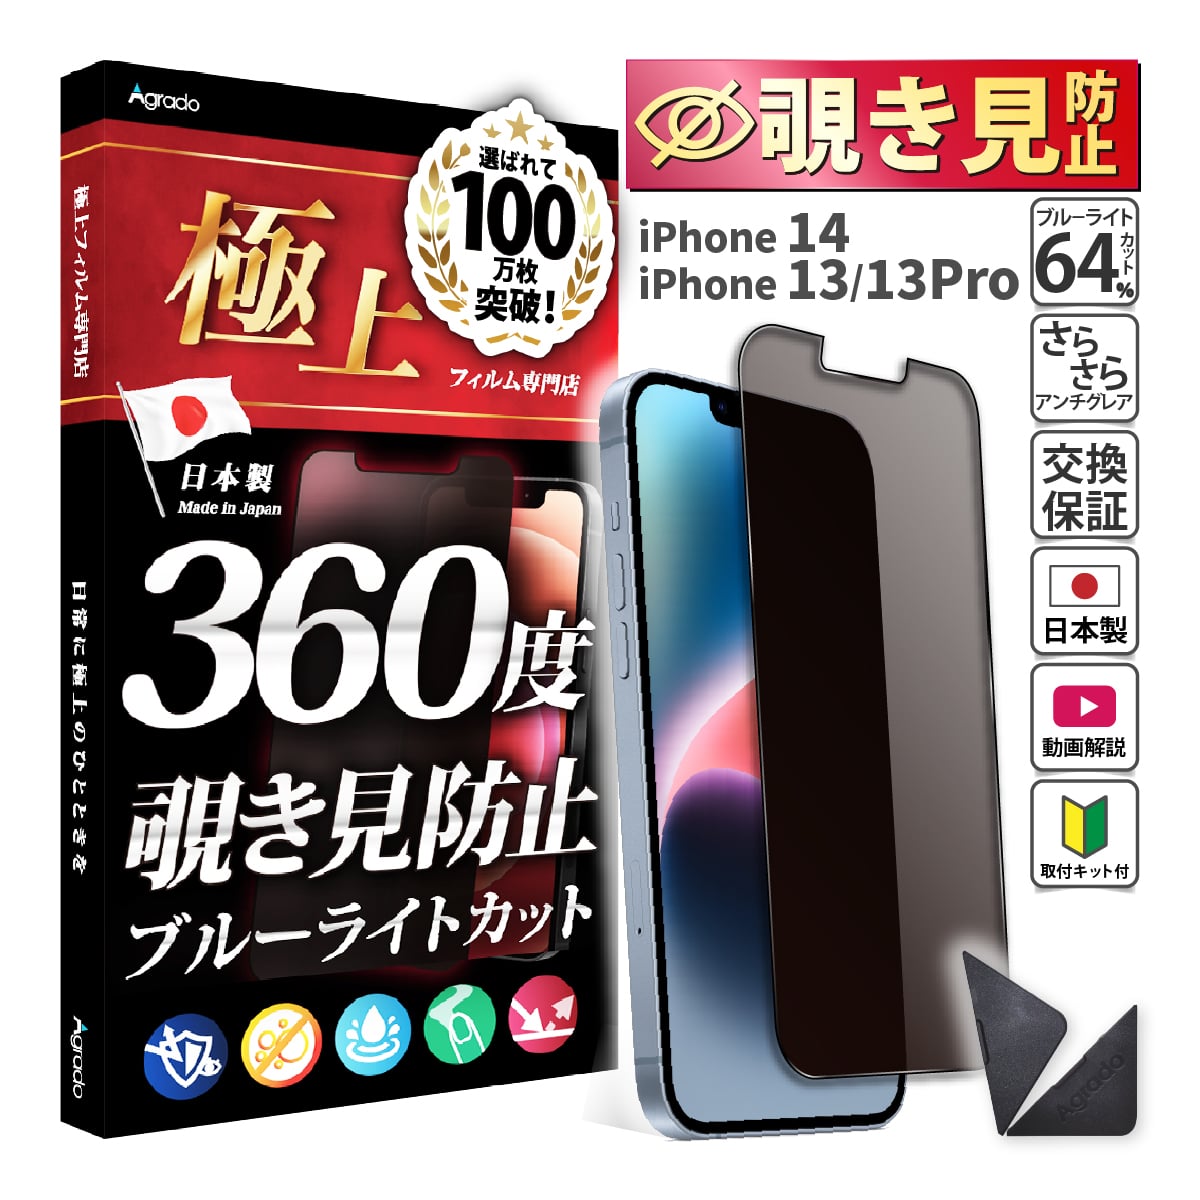 iPhone ガラスフィルム 覗見防止 フィルター 強化ガラス iPhone15 iPhone14 iPhone13 12 11 Pro Max XS XR iPhone8 7 Plus 3D 立体 保護フィルム